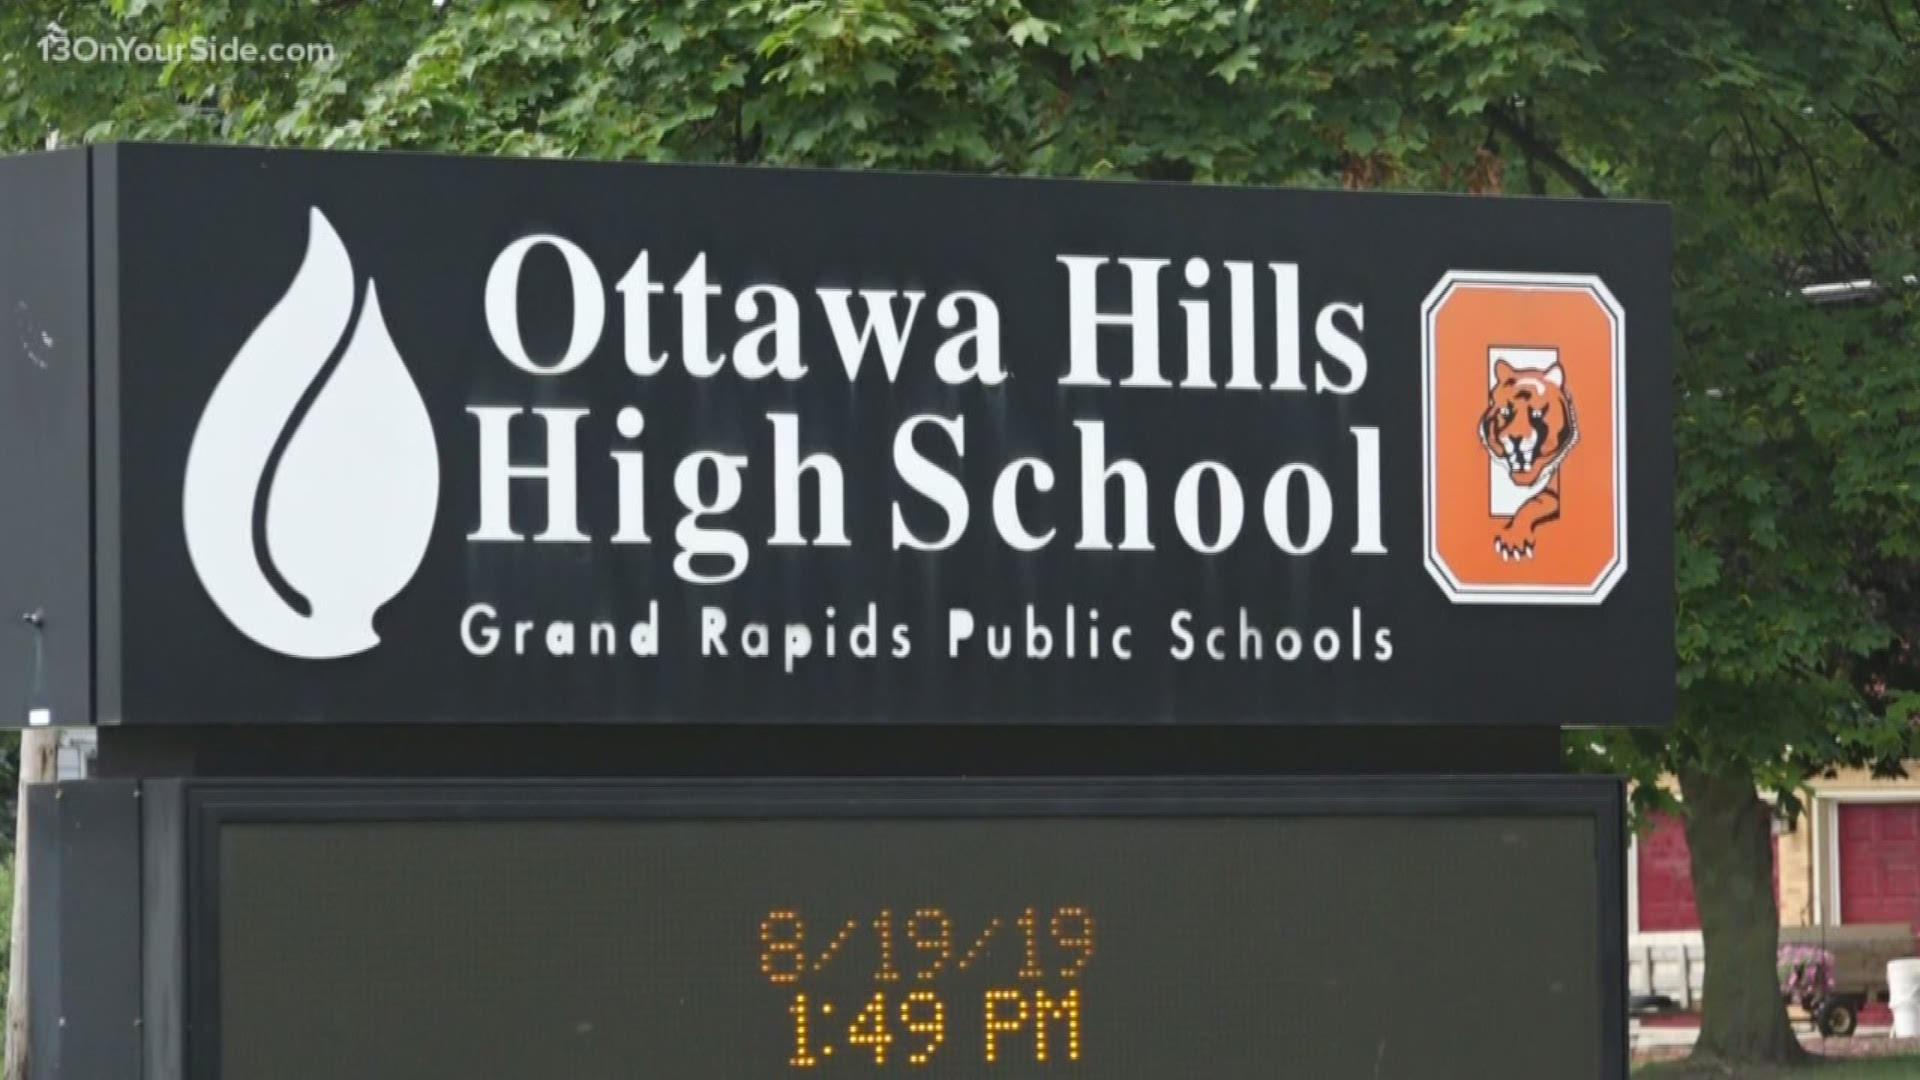 For many students in West Michigan, today is the end of summer and the first day back to school. 13 ON YOUR SIDE's Kristin Mazur is live at Ottawa Hills, where students will be filing in for classes.